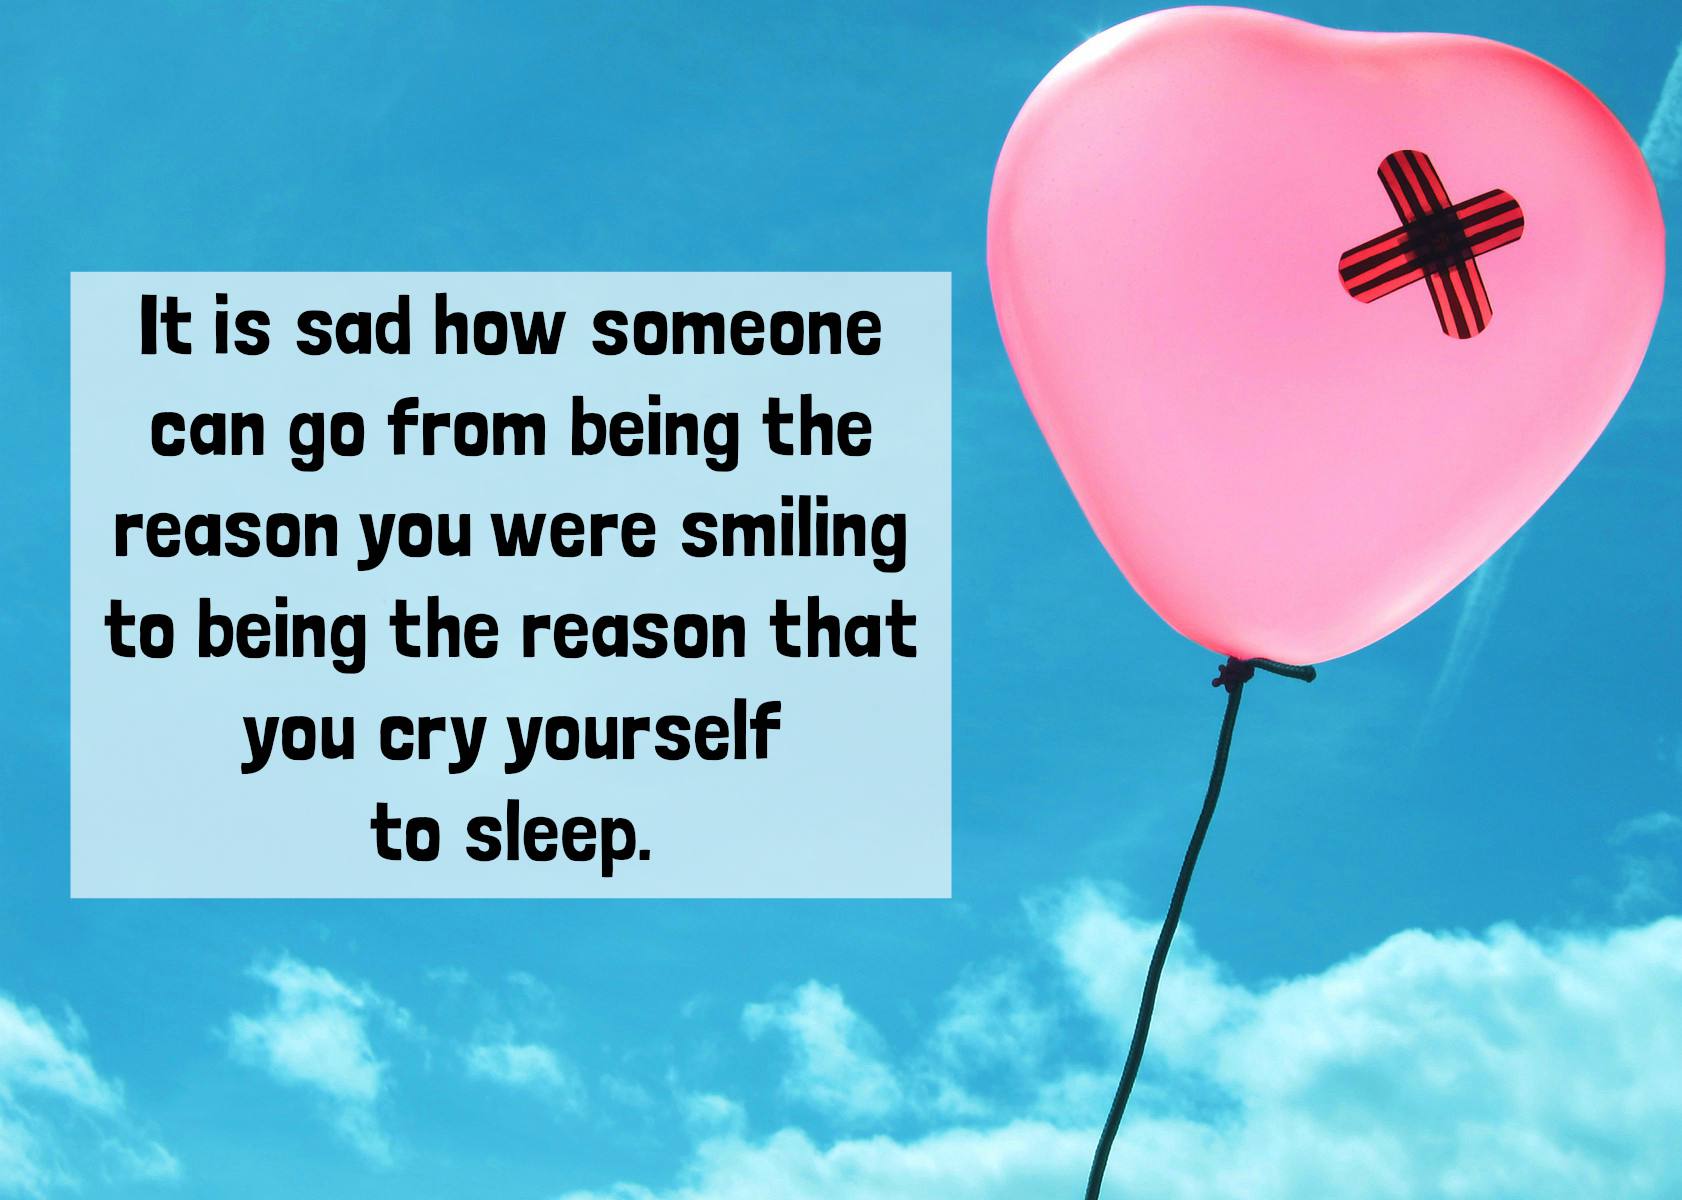 Will you quotes that make break sad cry up 31 Incredibly